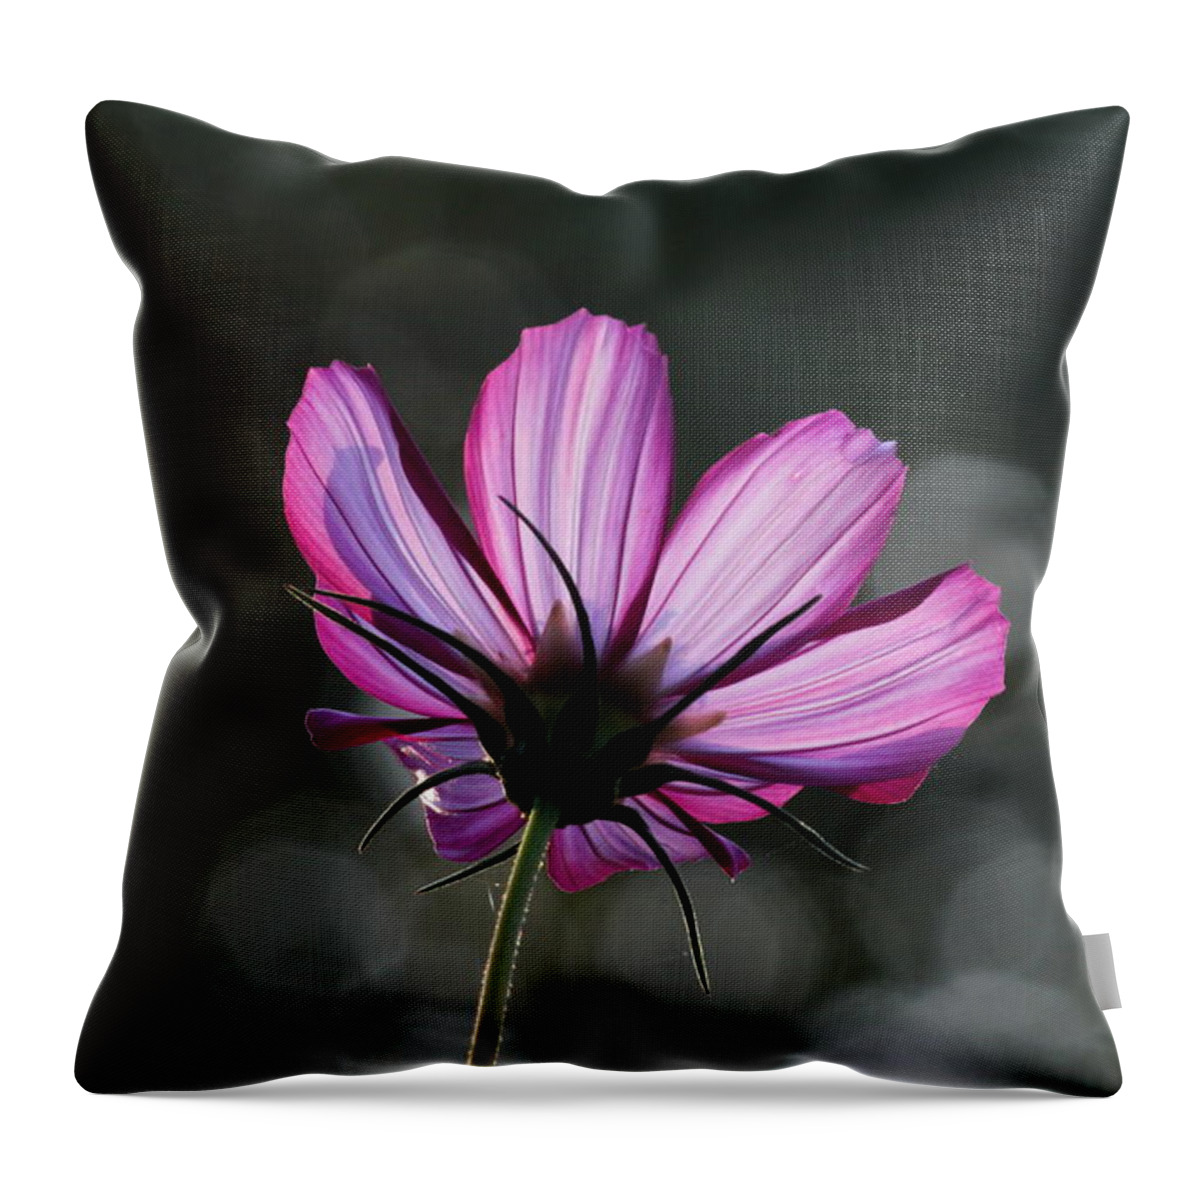 Morning Throw Pillow featuring the photograph Sunlit Beauty by Trent Mallett